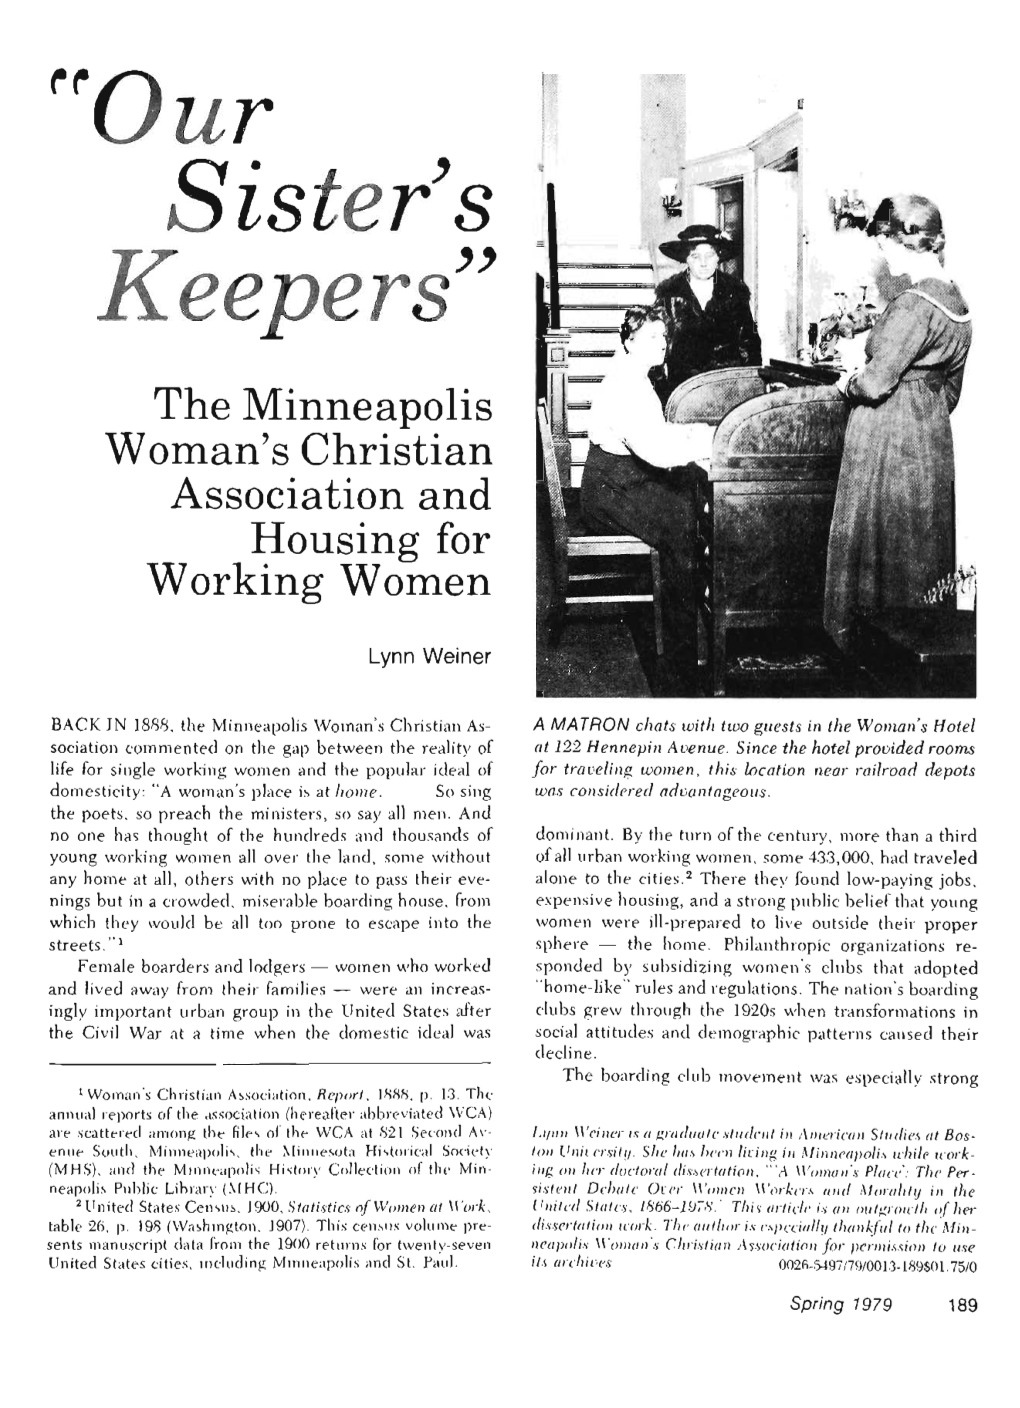 Our Sister's Keepers" : the Minneapolis Woman's Christian Association And